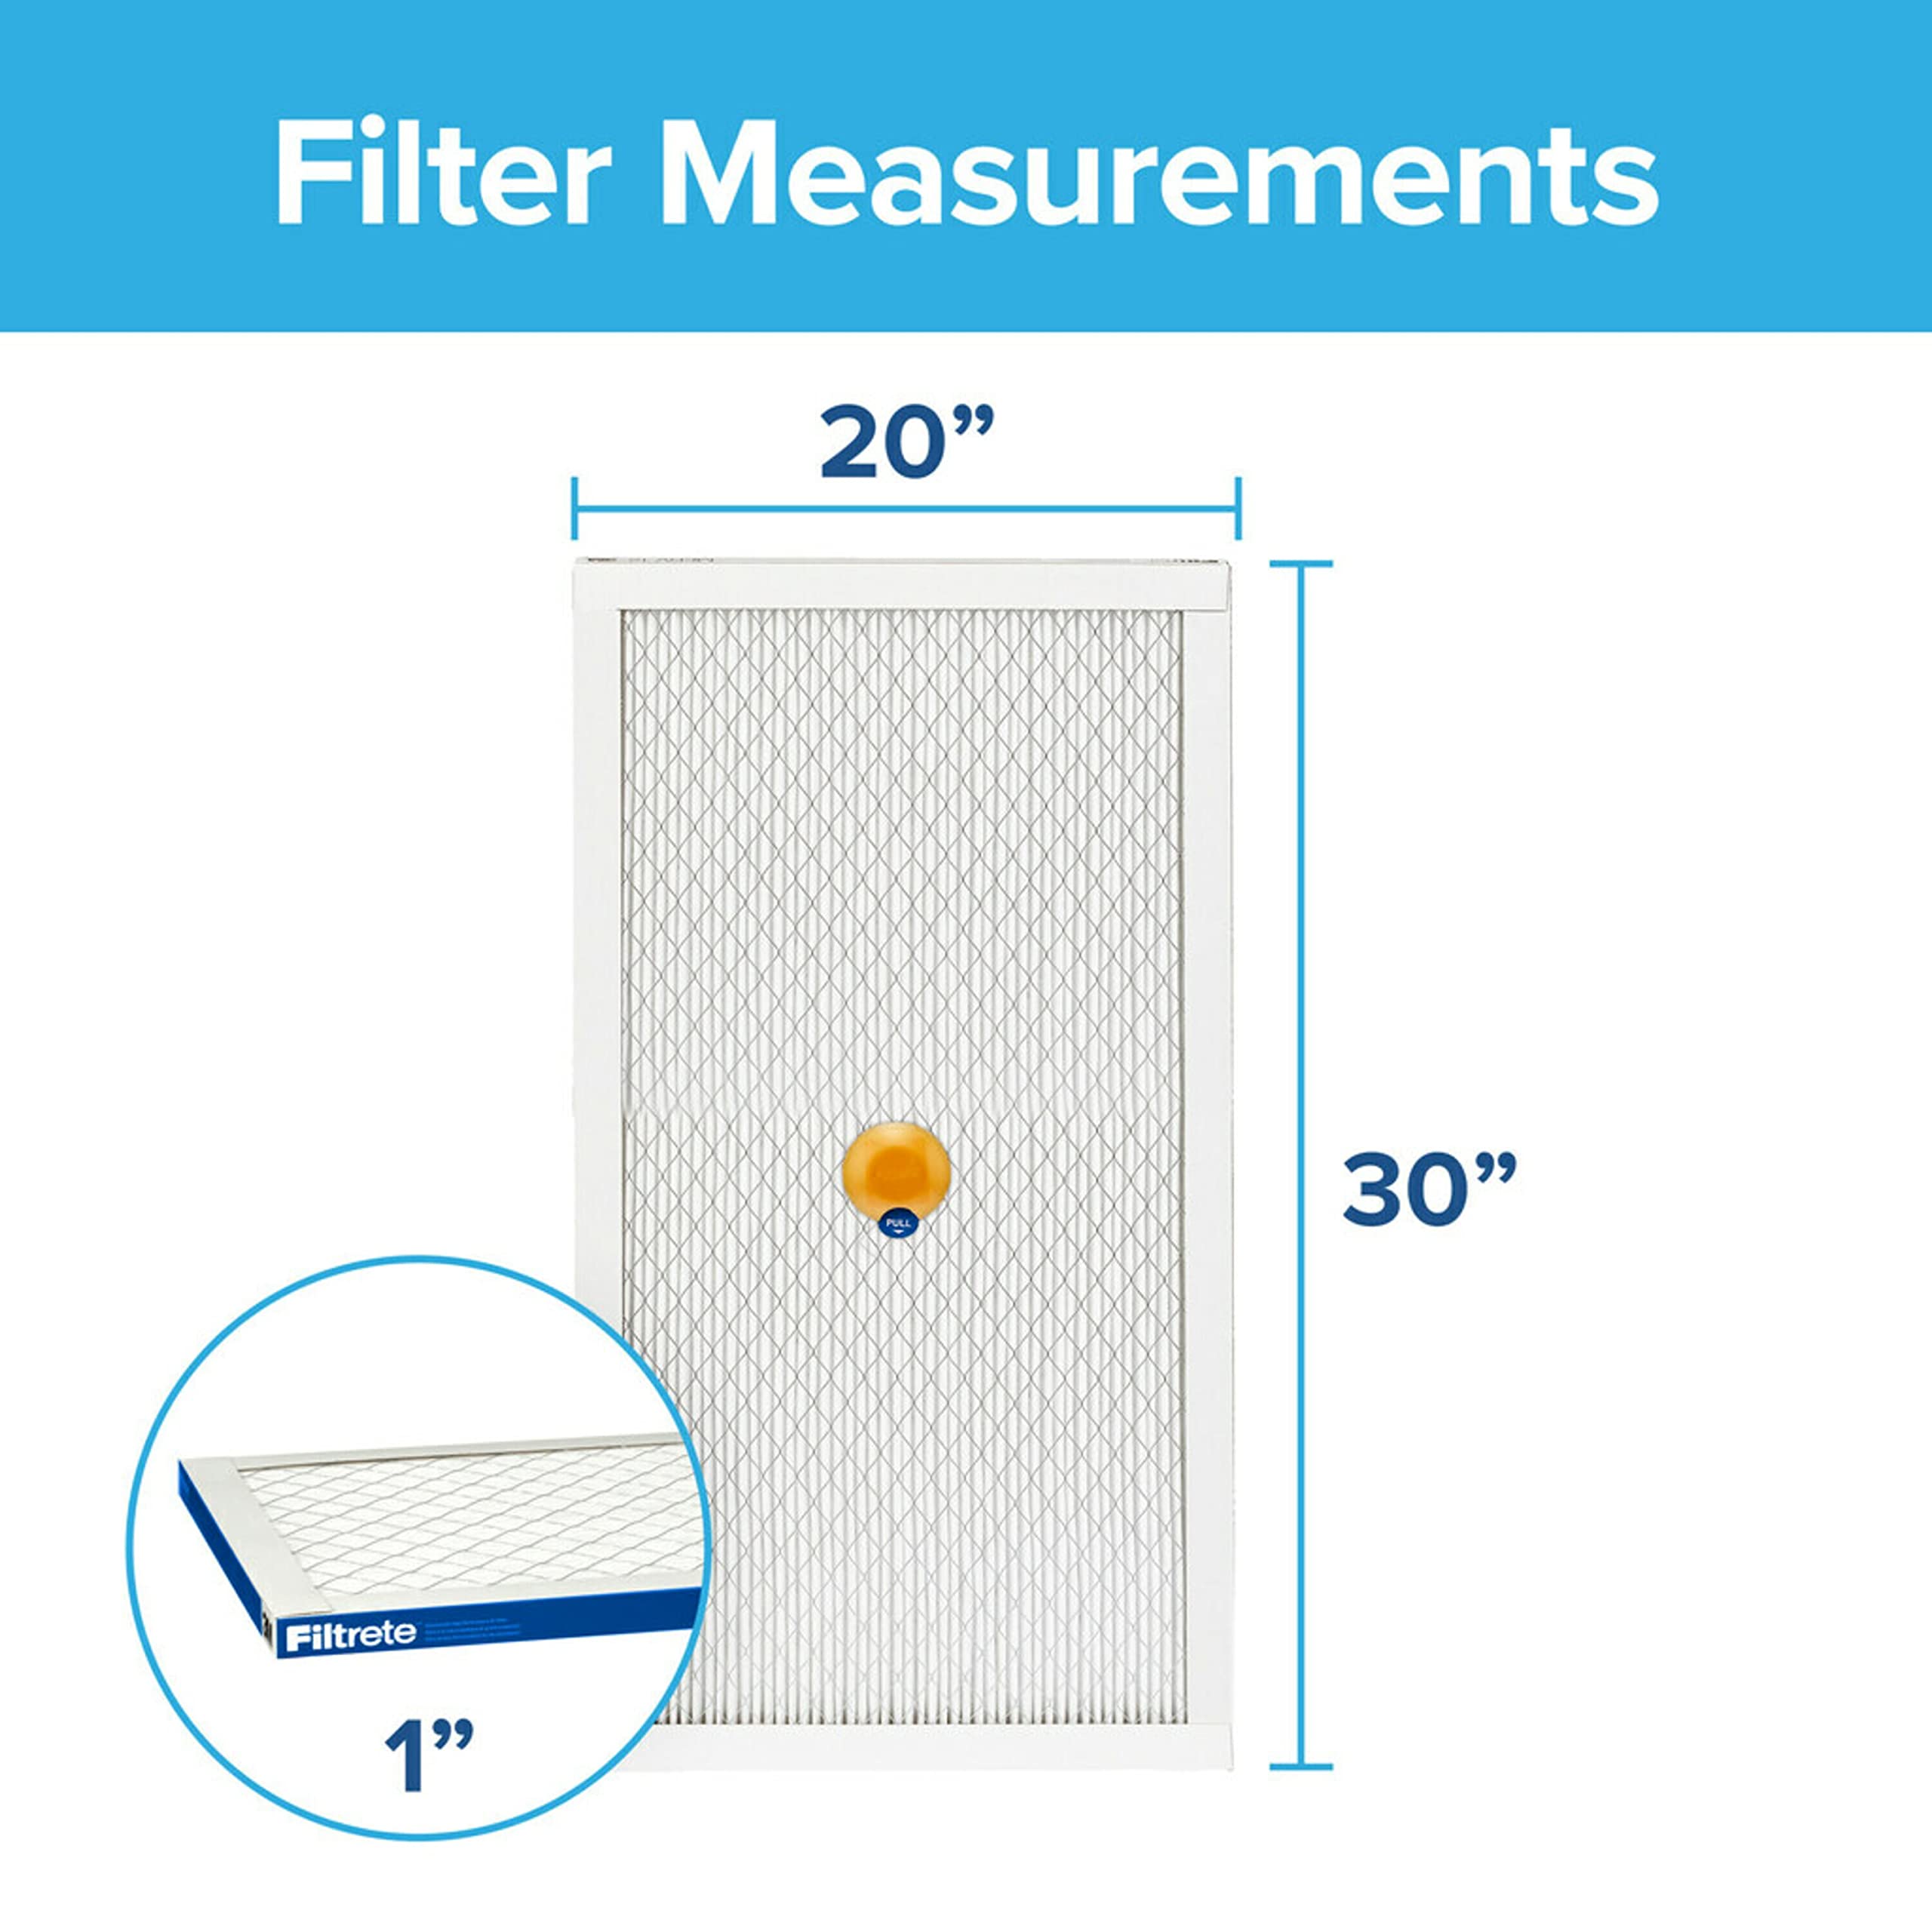 Filtrete 20x30x1 Smart Air Filter, MPR 2200 MERV 13, 1-Inch Premium Allergen & Home Pollutant Air Filters for AC and Furnace, 2 Filters